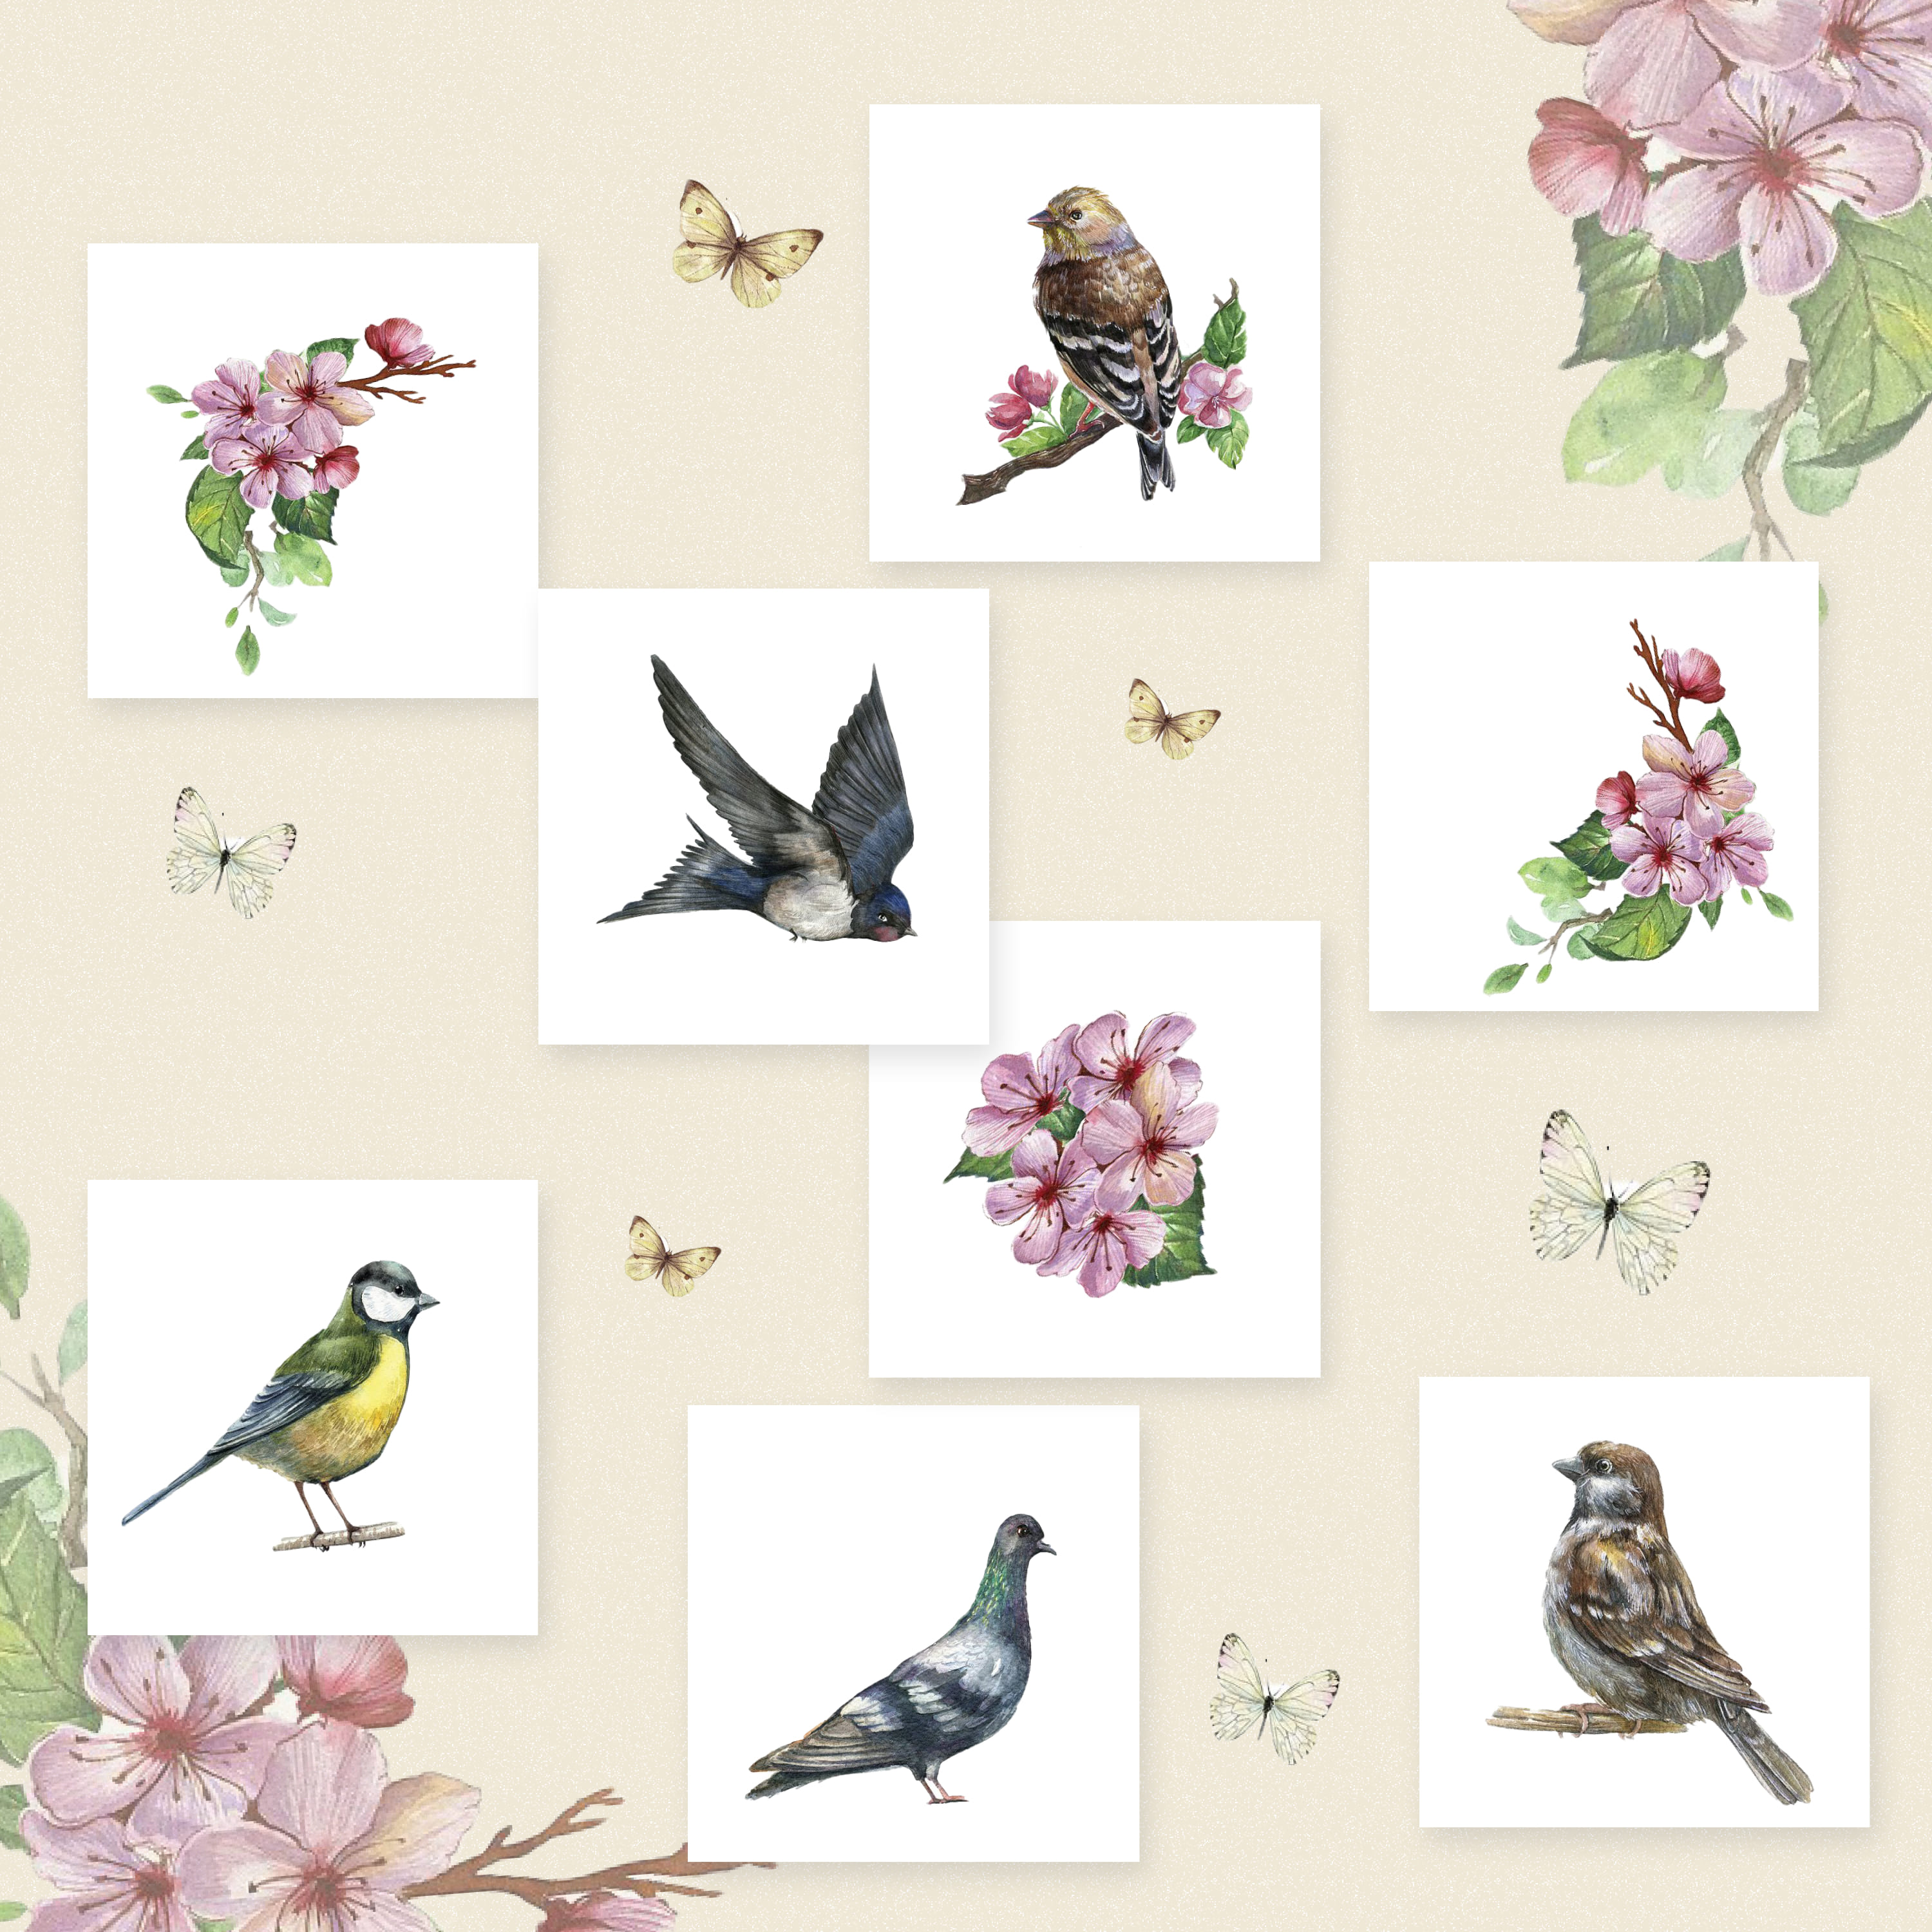 This is a watercolor set with bird and natural elements for your design.